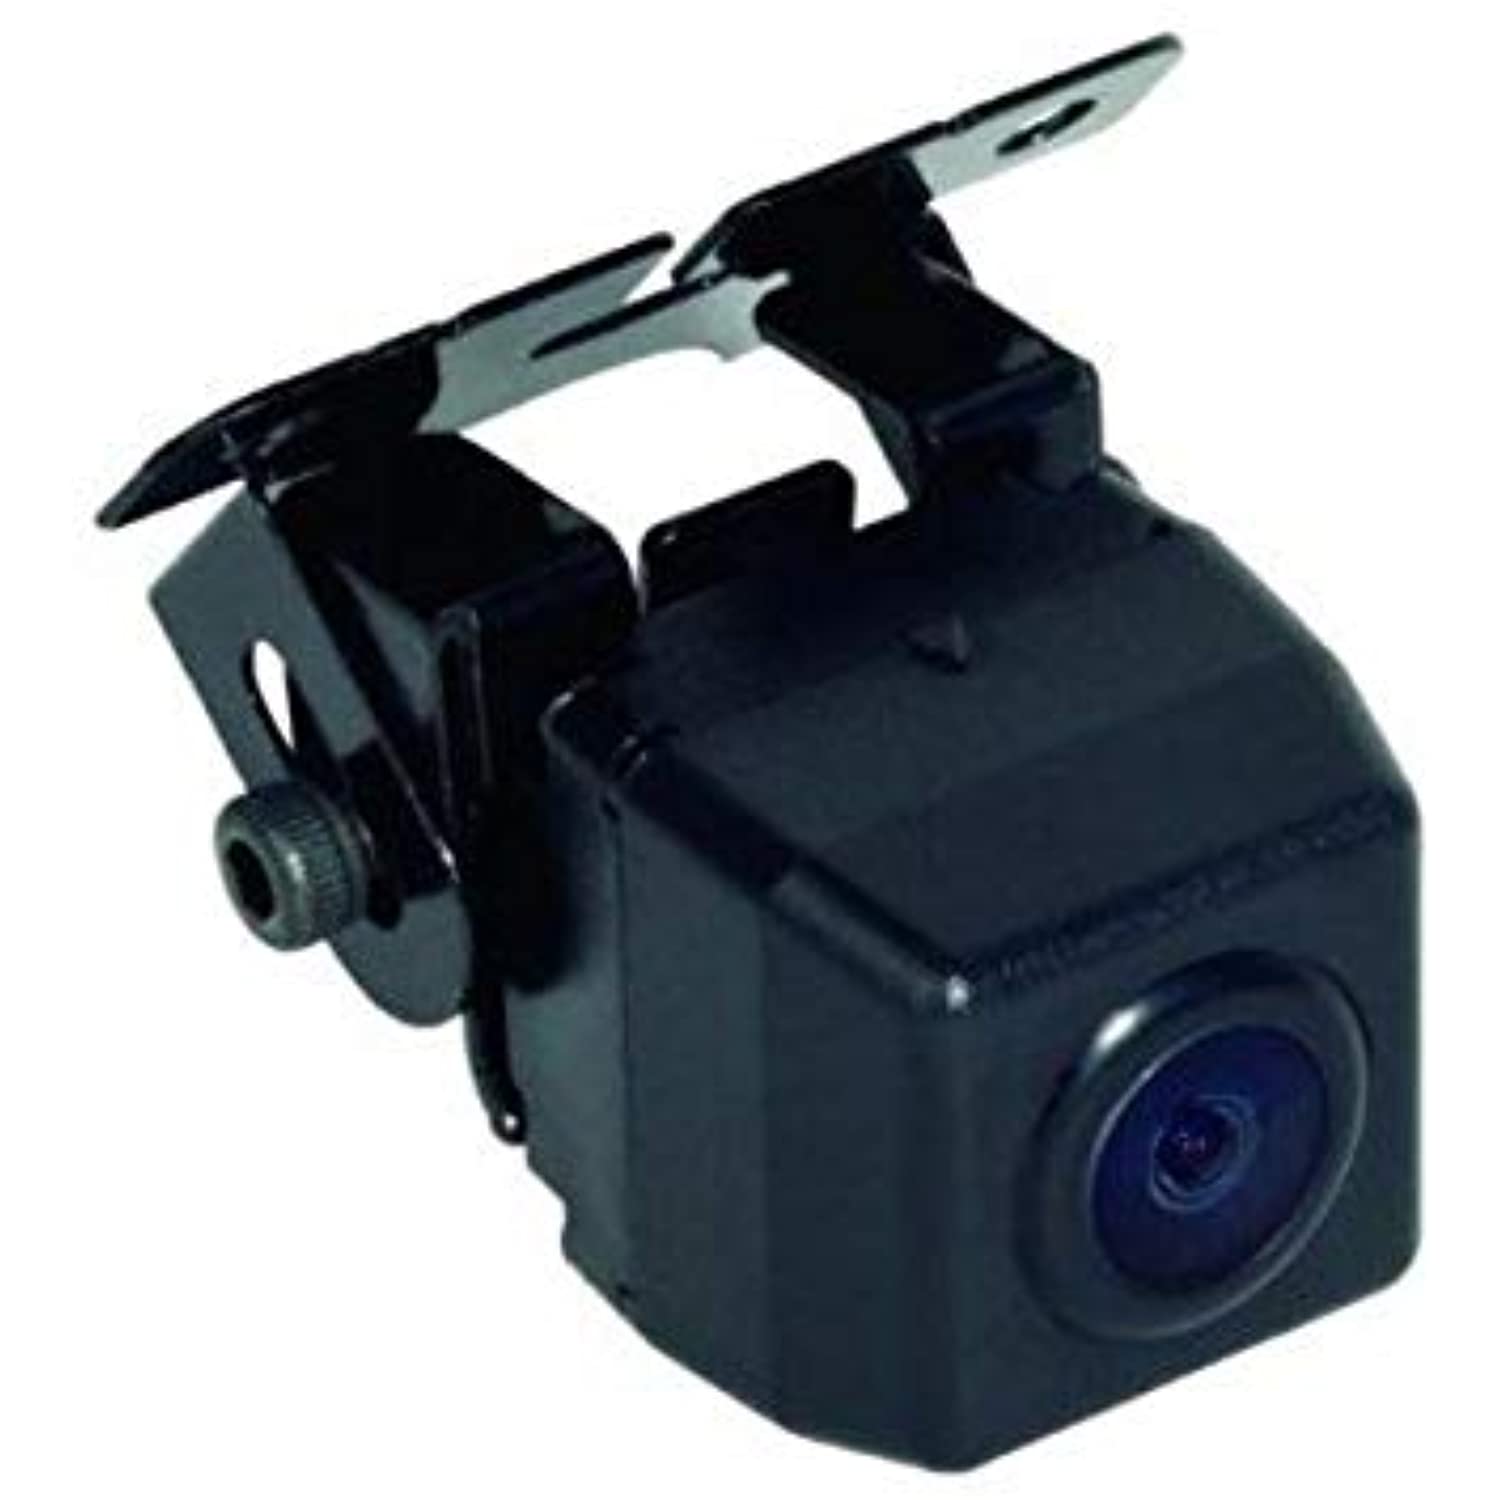 Metra Third Eye Square Camera with Wireless Video Transmitter and Receiver (Black)